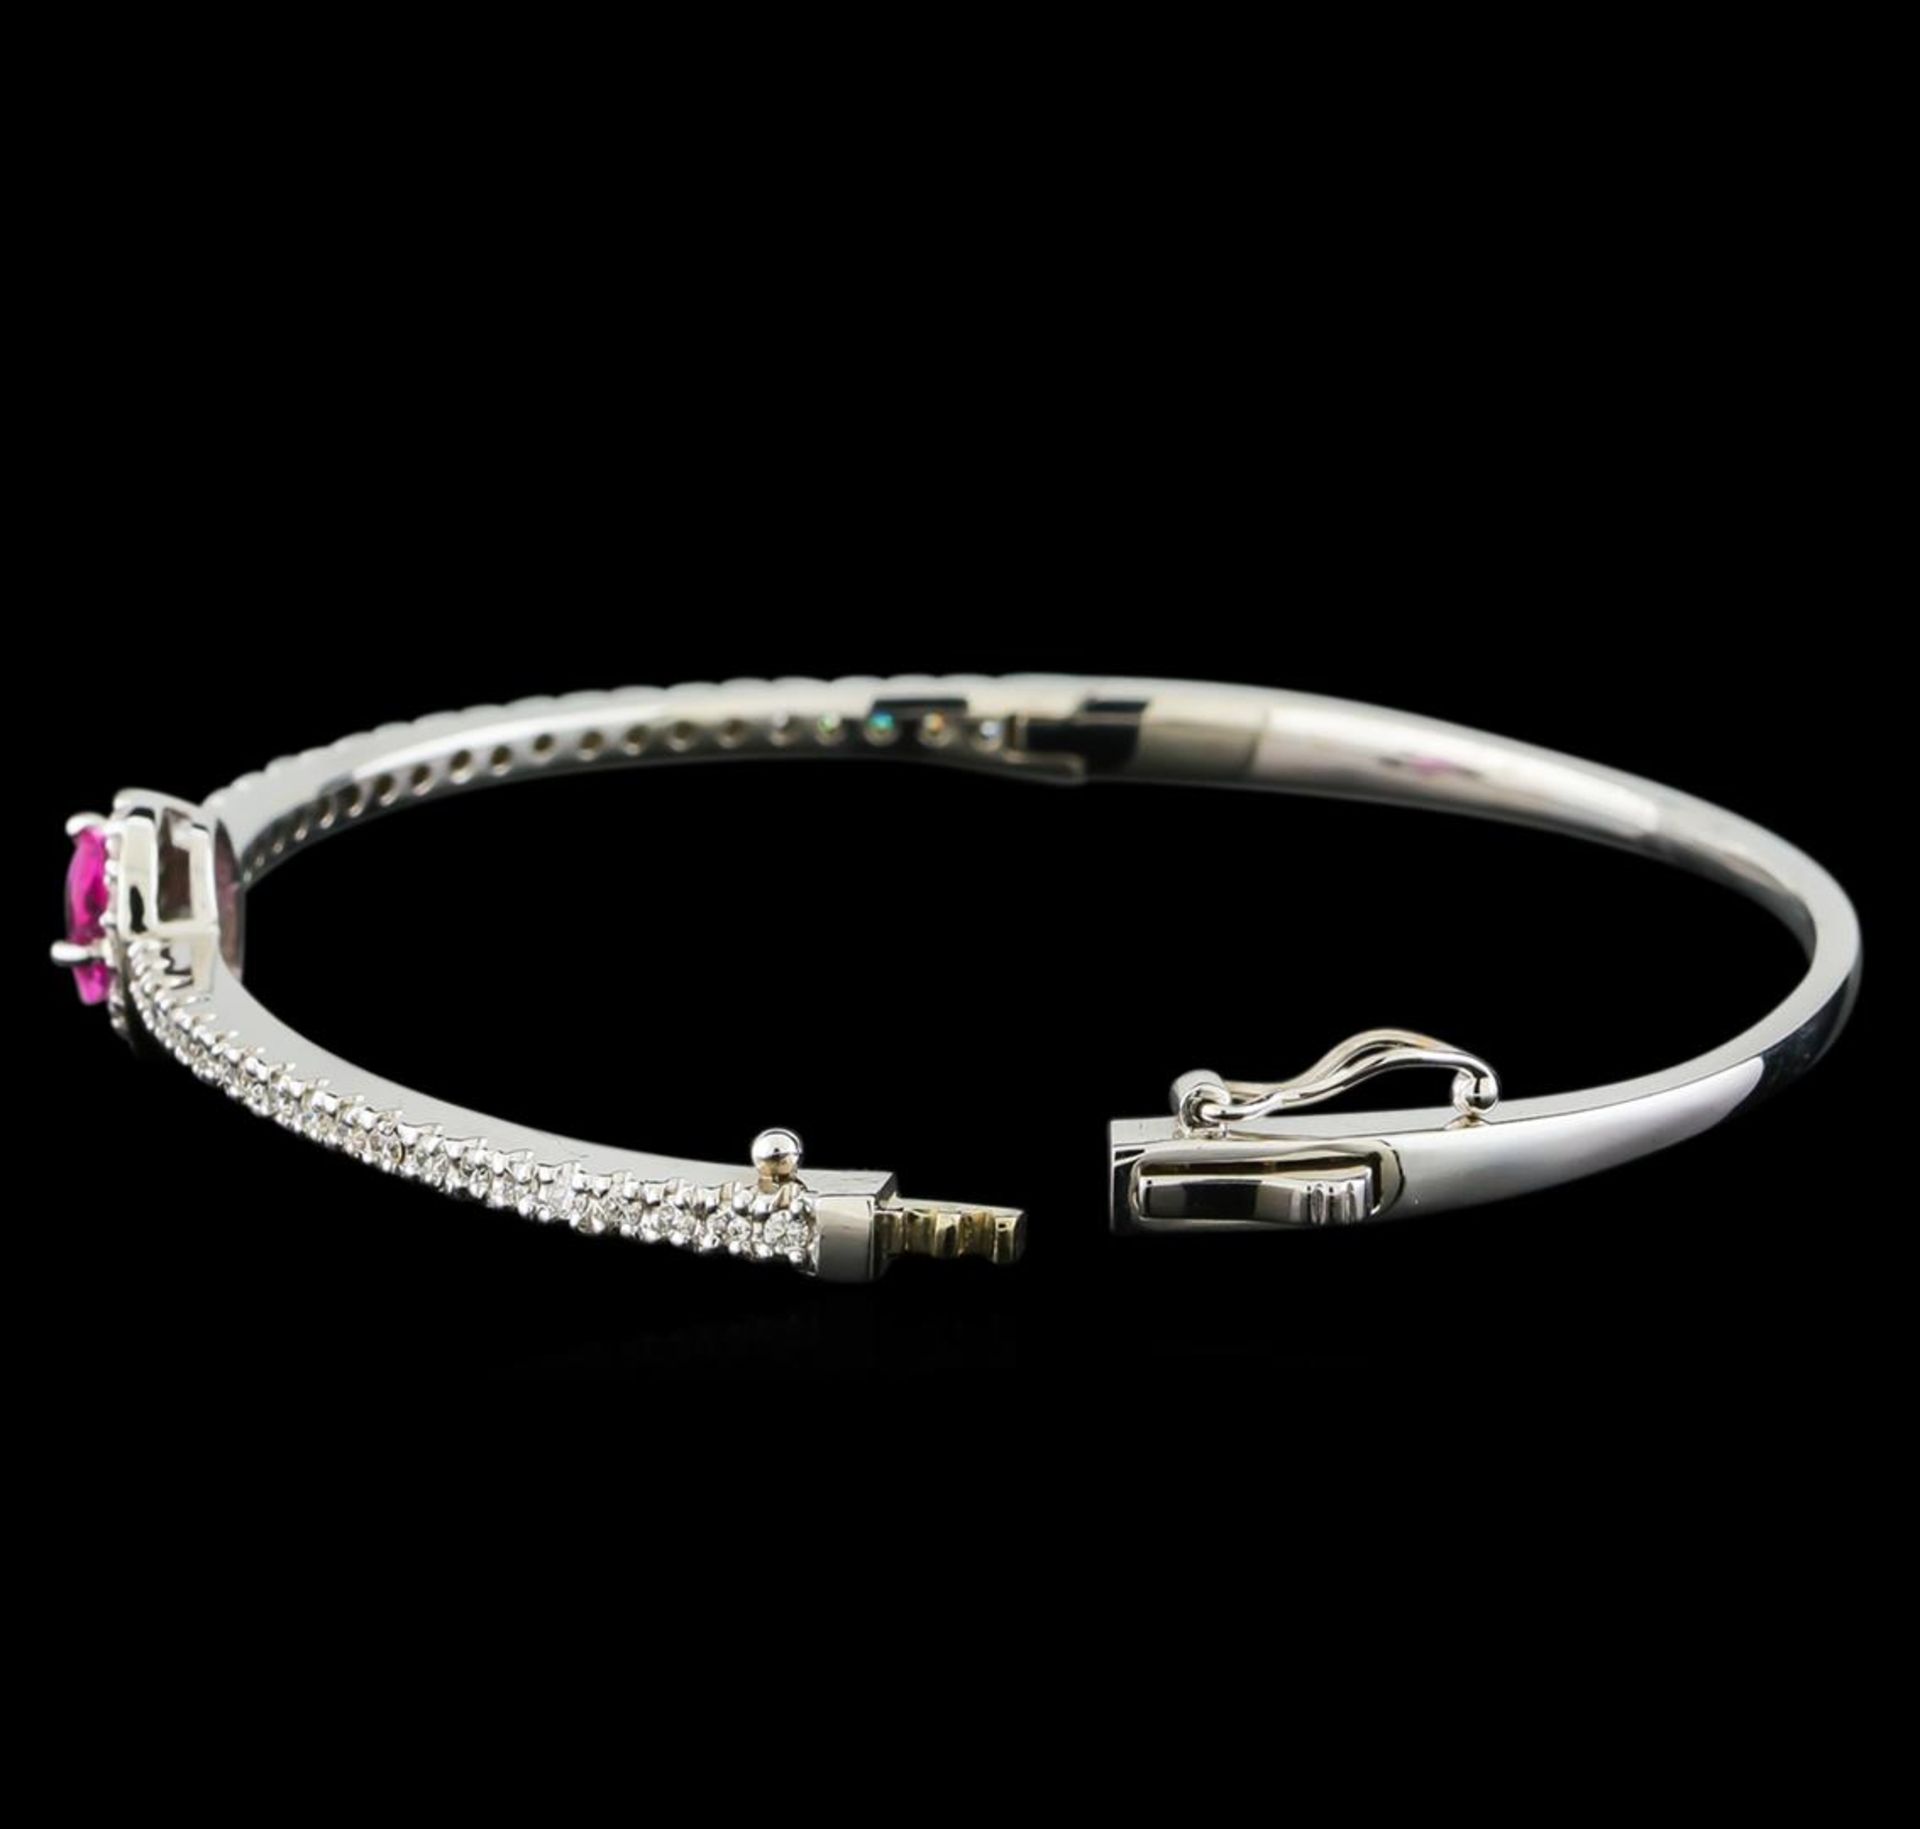 1.08 ctw Pink Sapphire and Diamond Bracelet - 14KT White Gold - Image 3 of 4